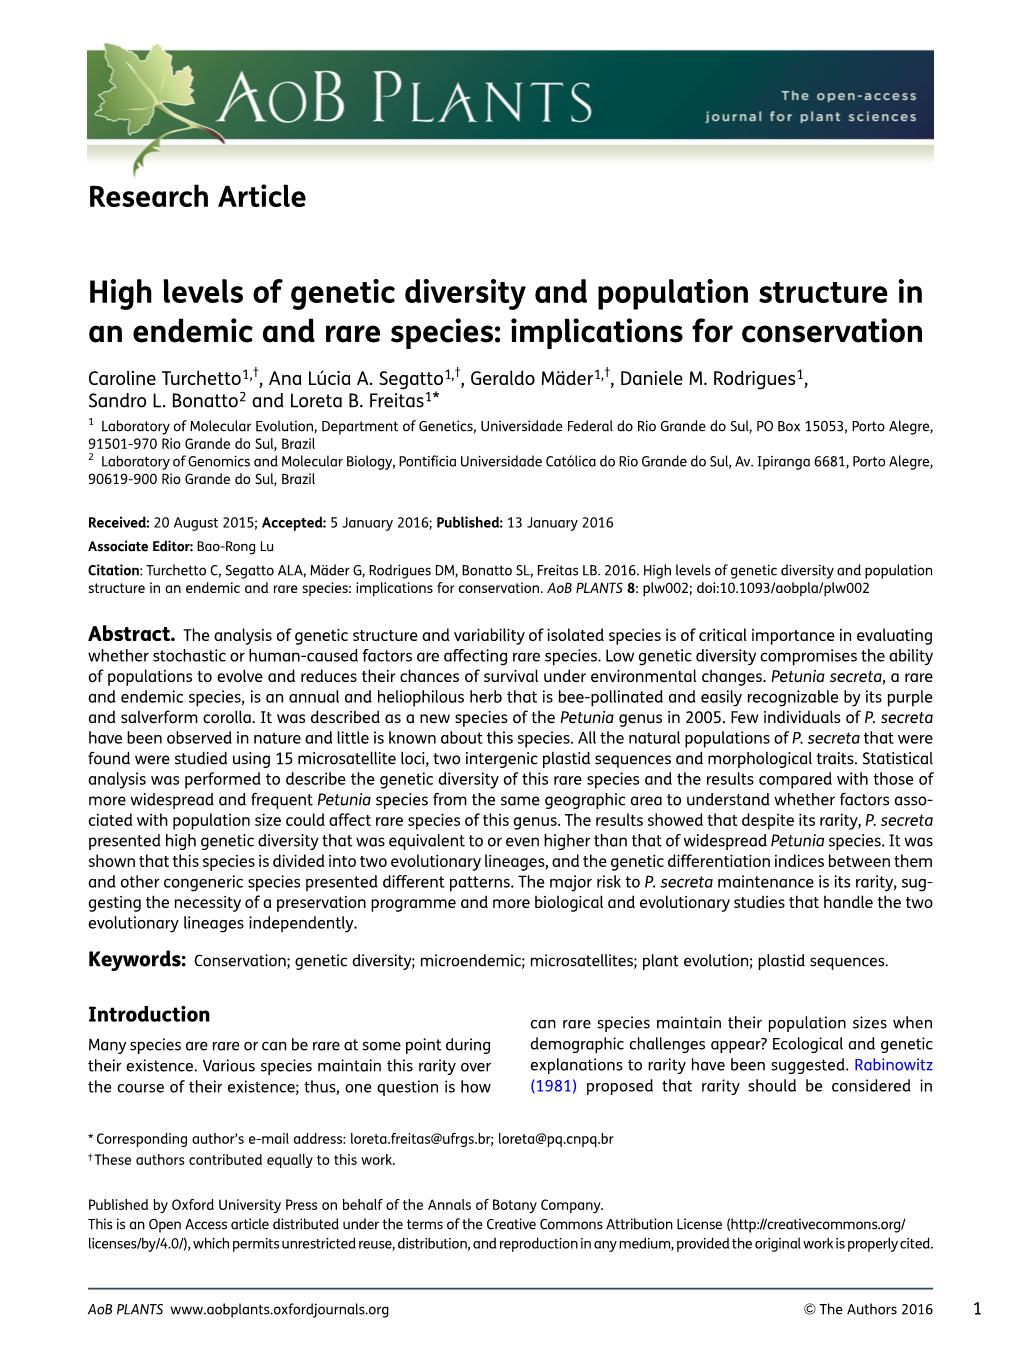 High Levels of Genetic Diversity and Population Structure in an Endemic and Rare Species: Implications for Conservation